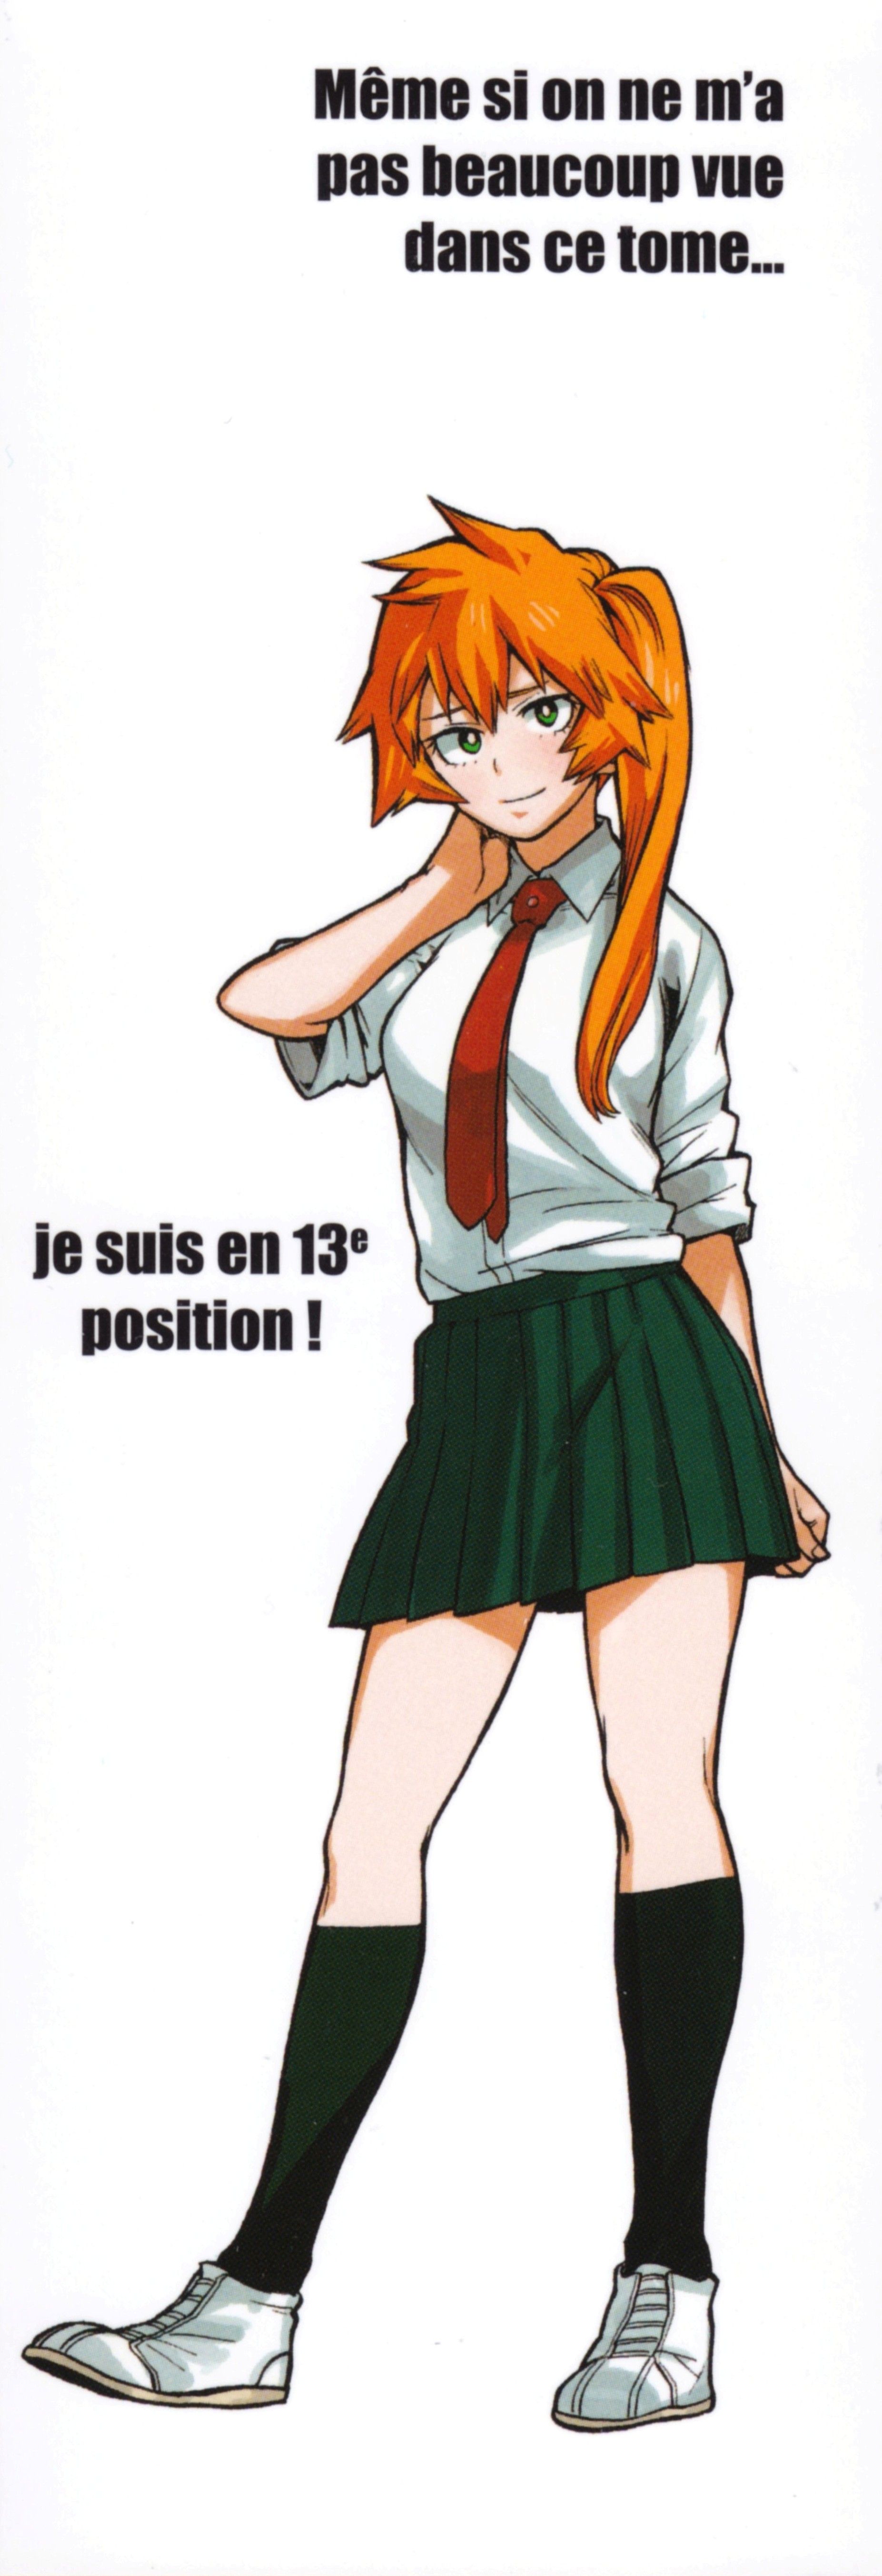 Itsuka Kendou and Scan Gallery